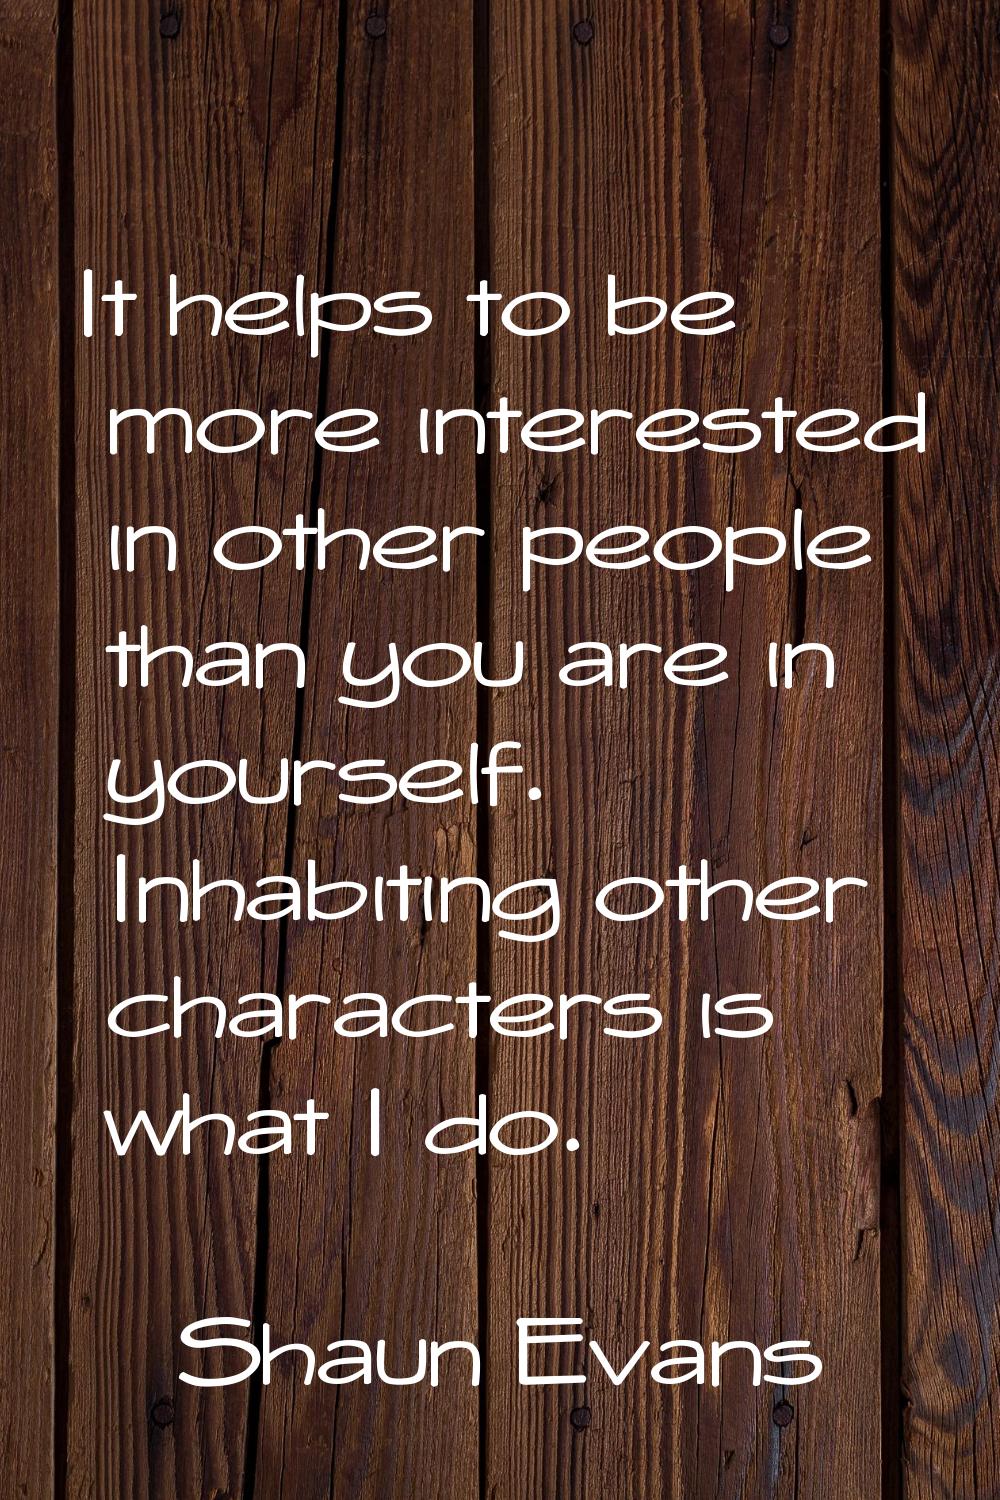 It helps to be more interested in other people than you are in yourself. Inhabiting other character